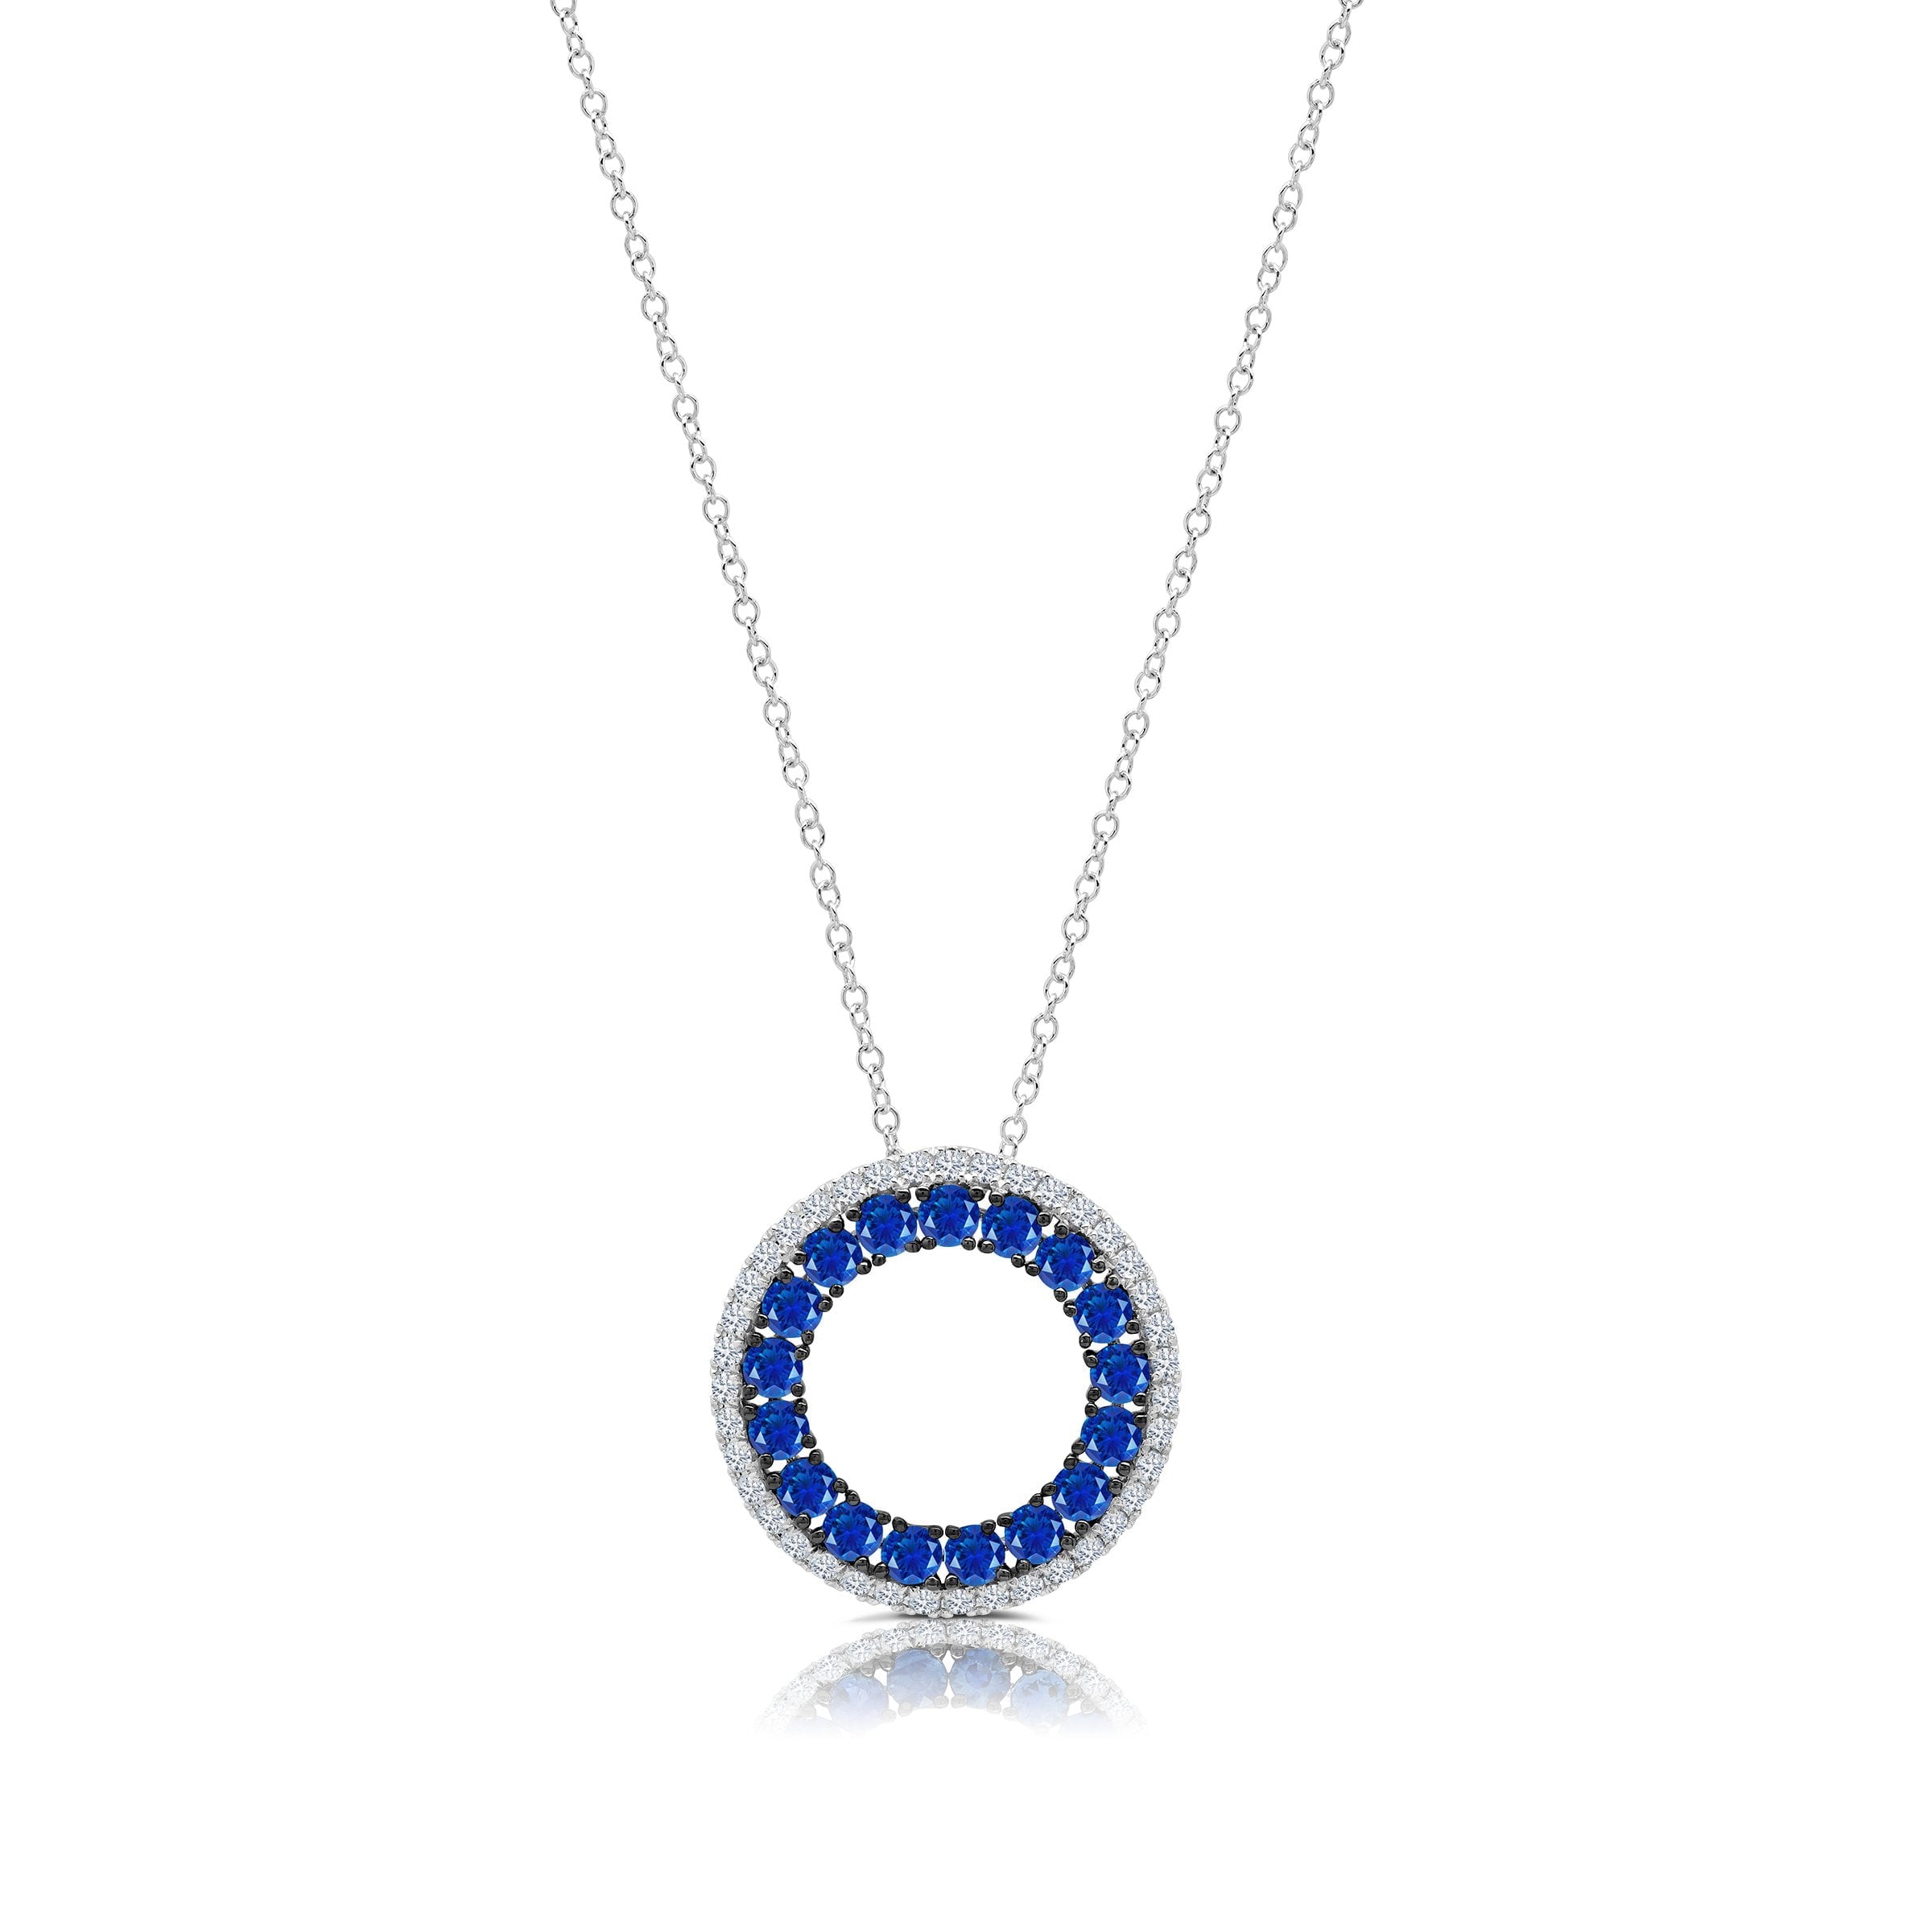 Graziela Gems - Necklace - Sapphire 3 Sided Circle Necklace - 